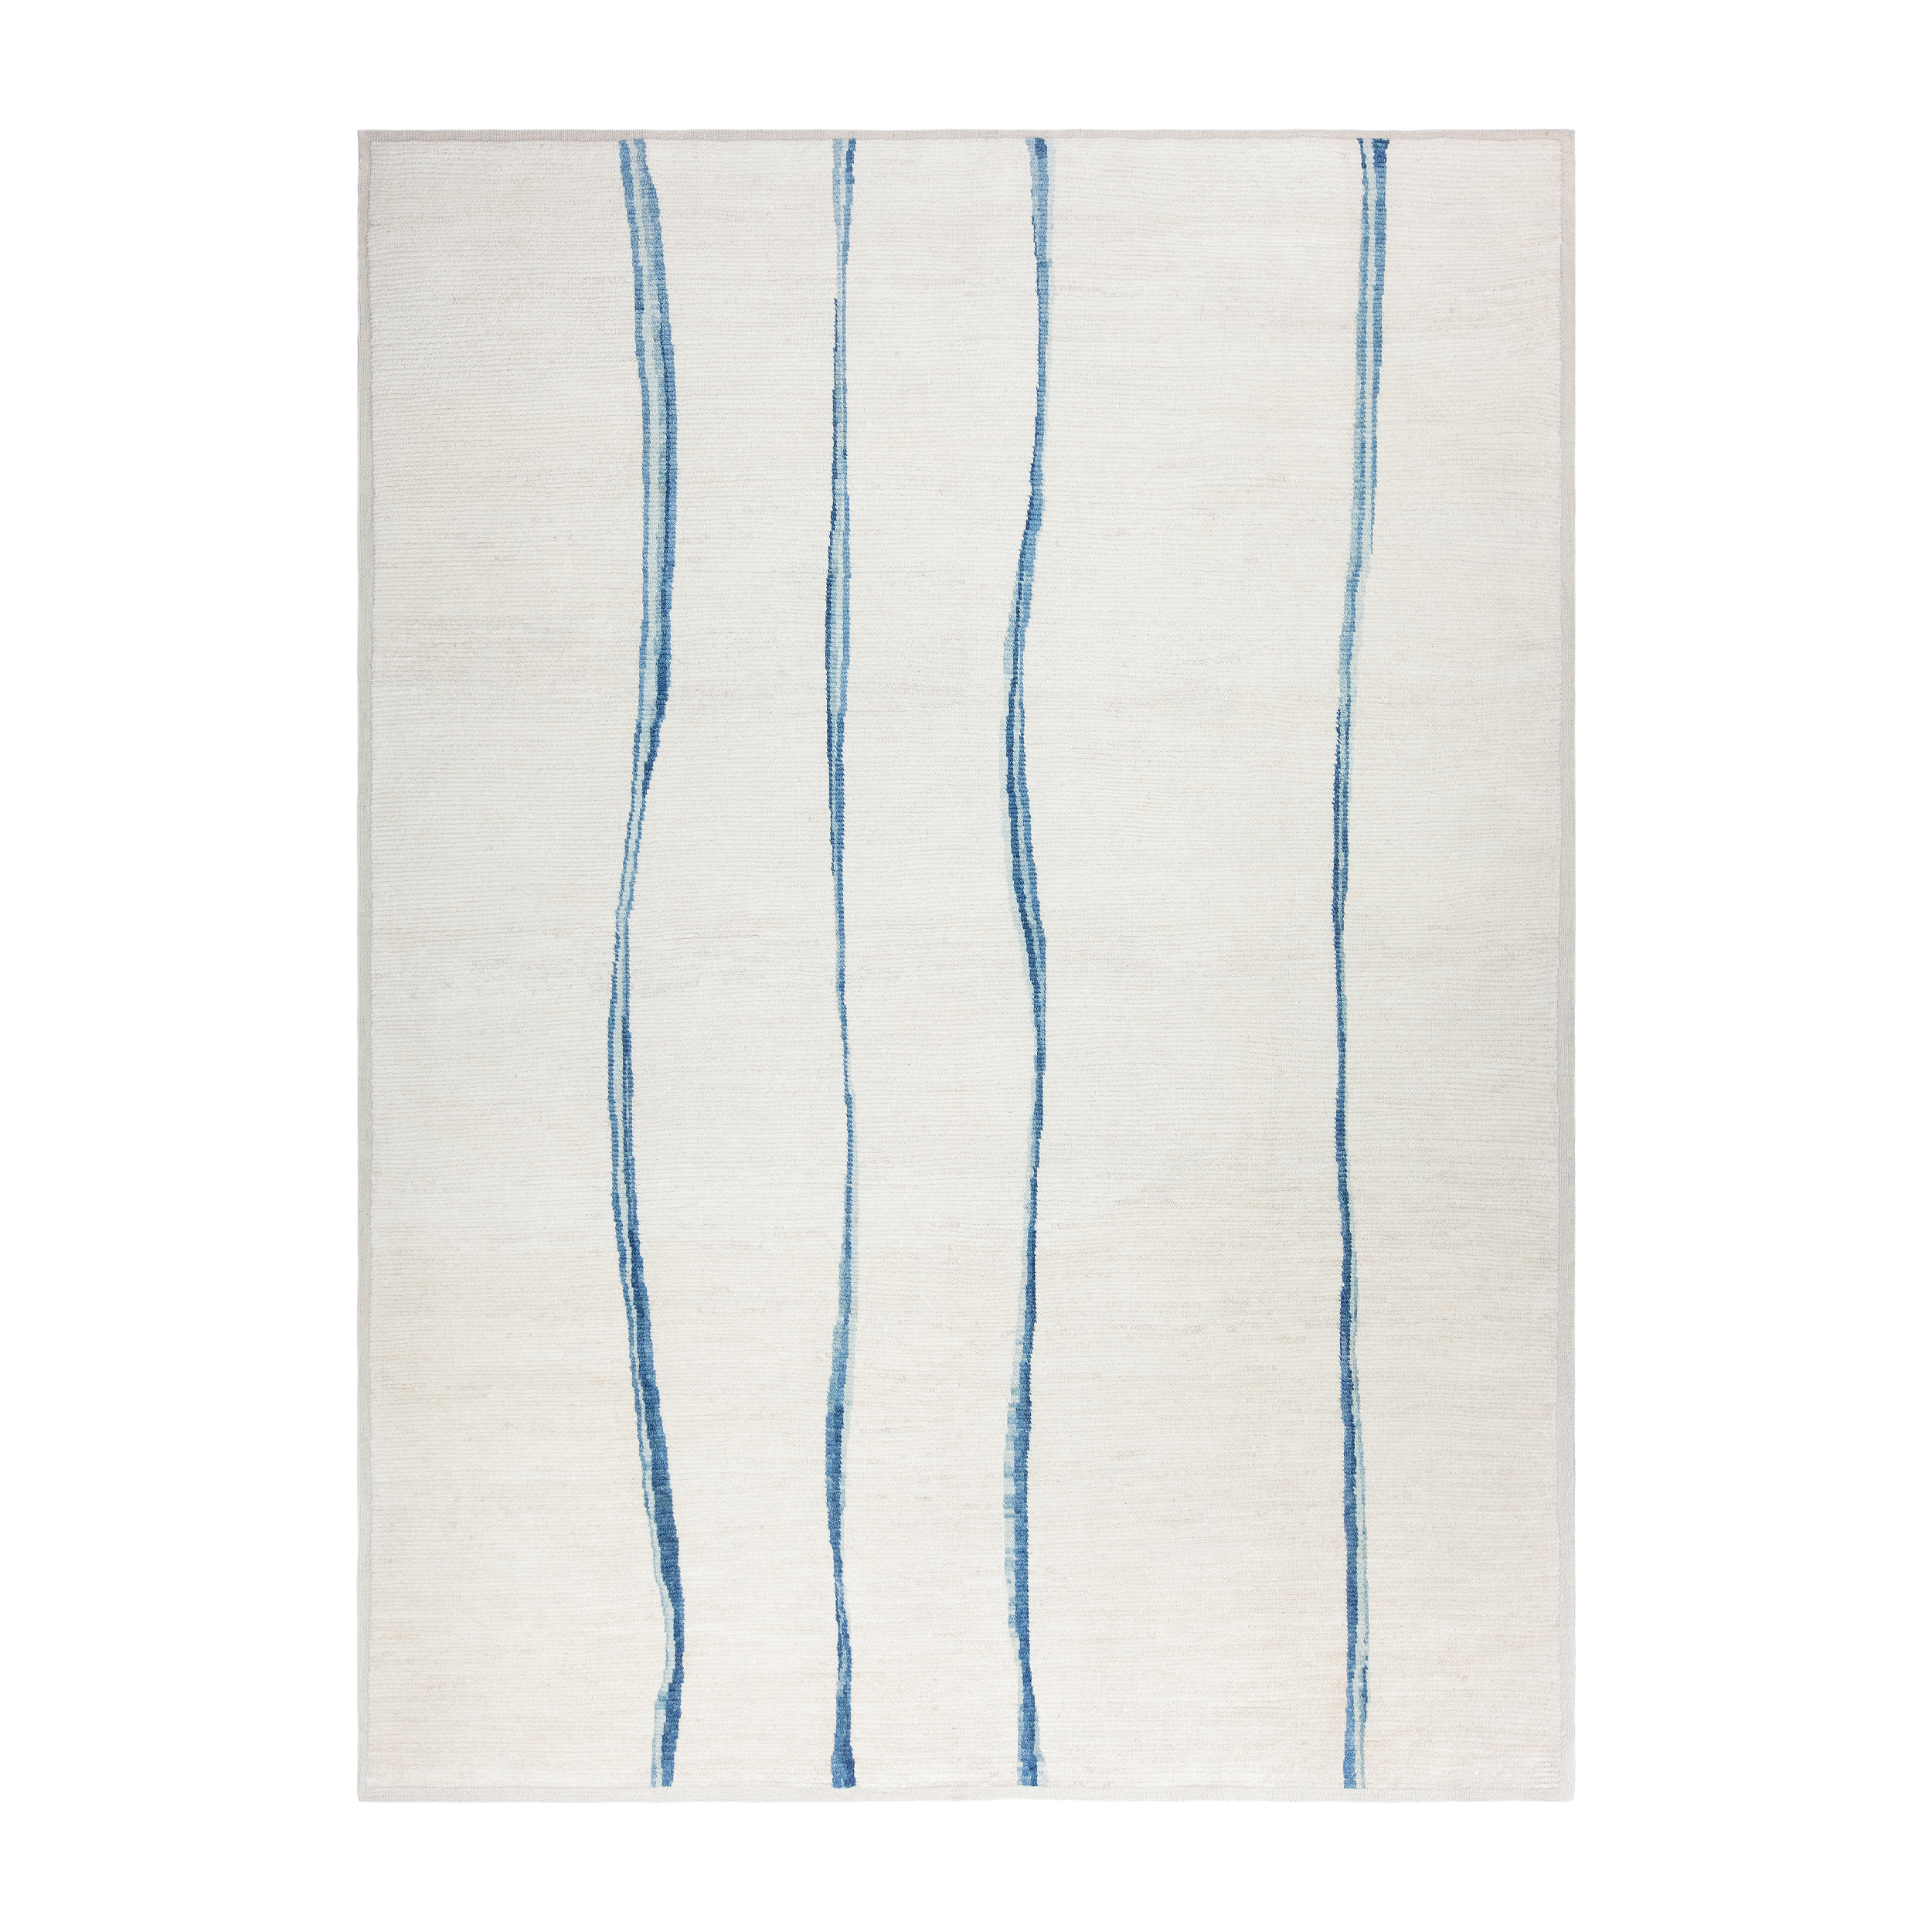 Crete Rug is a hand-knotted piece using the finest quality wool and natural dyes. 